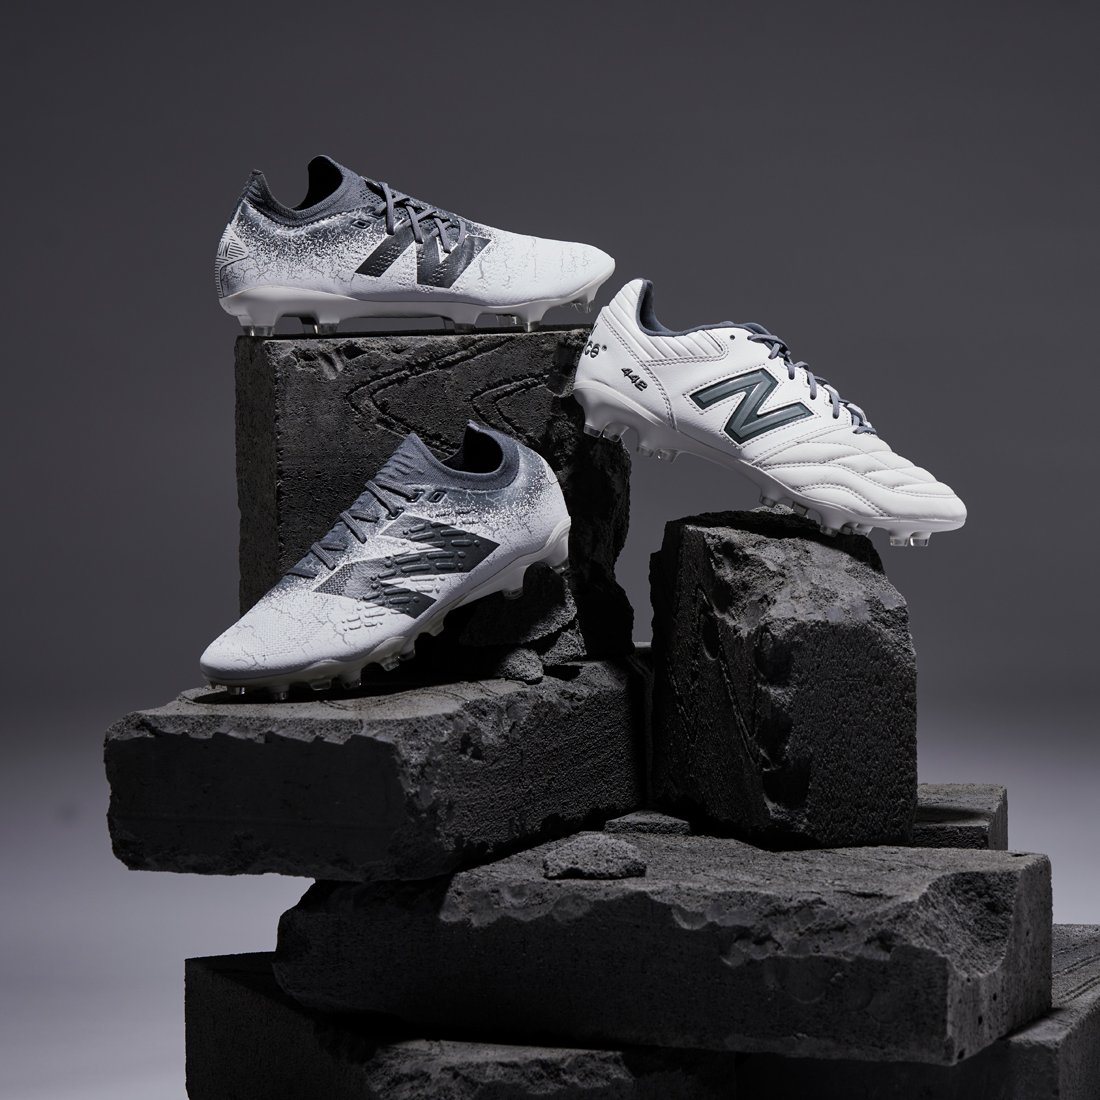 Lining up for this year's ‘Grey Day’ – the brand’s self-made holiday that celebrates their iconic neutral colour palette – @NBFootball have dropped the ‘Grey Days’ pack, featuring the Furon v7+, Tekela v4+ and 442 v2. Closer look: soccerbible.com/performance/fo…